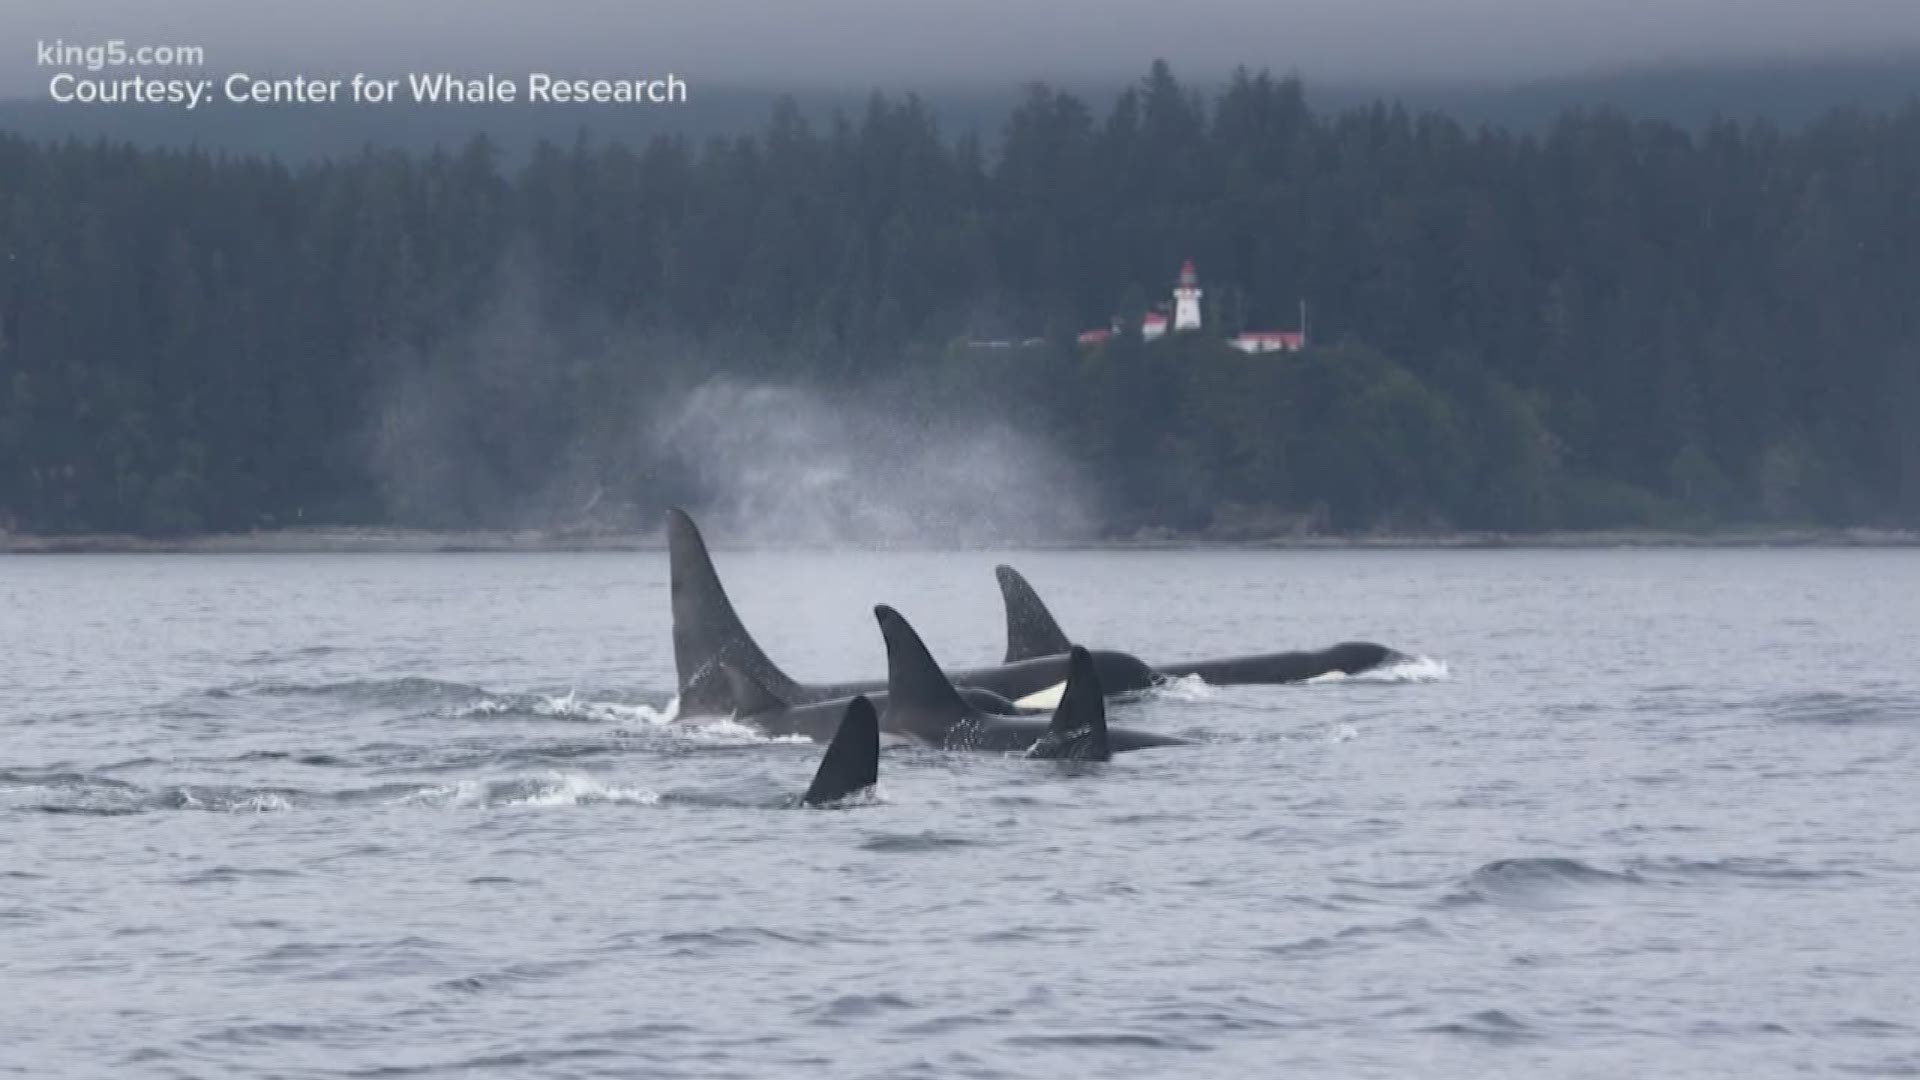 An orca who appeared to be struggling last year was missing during the latest encounter with his pod earlier in January. KING 5's Michael Crowe reports.